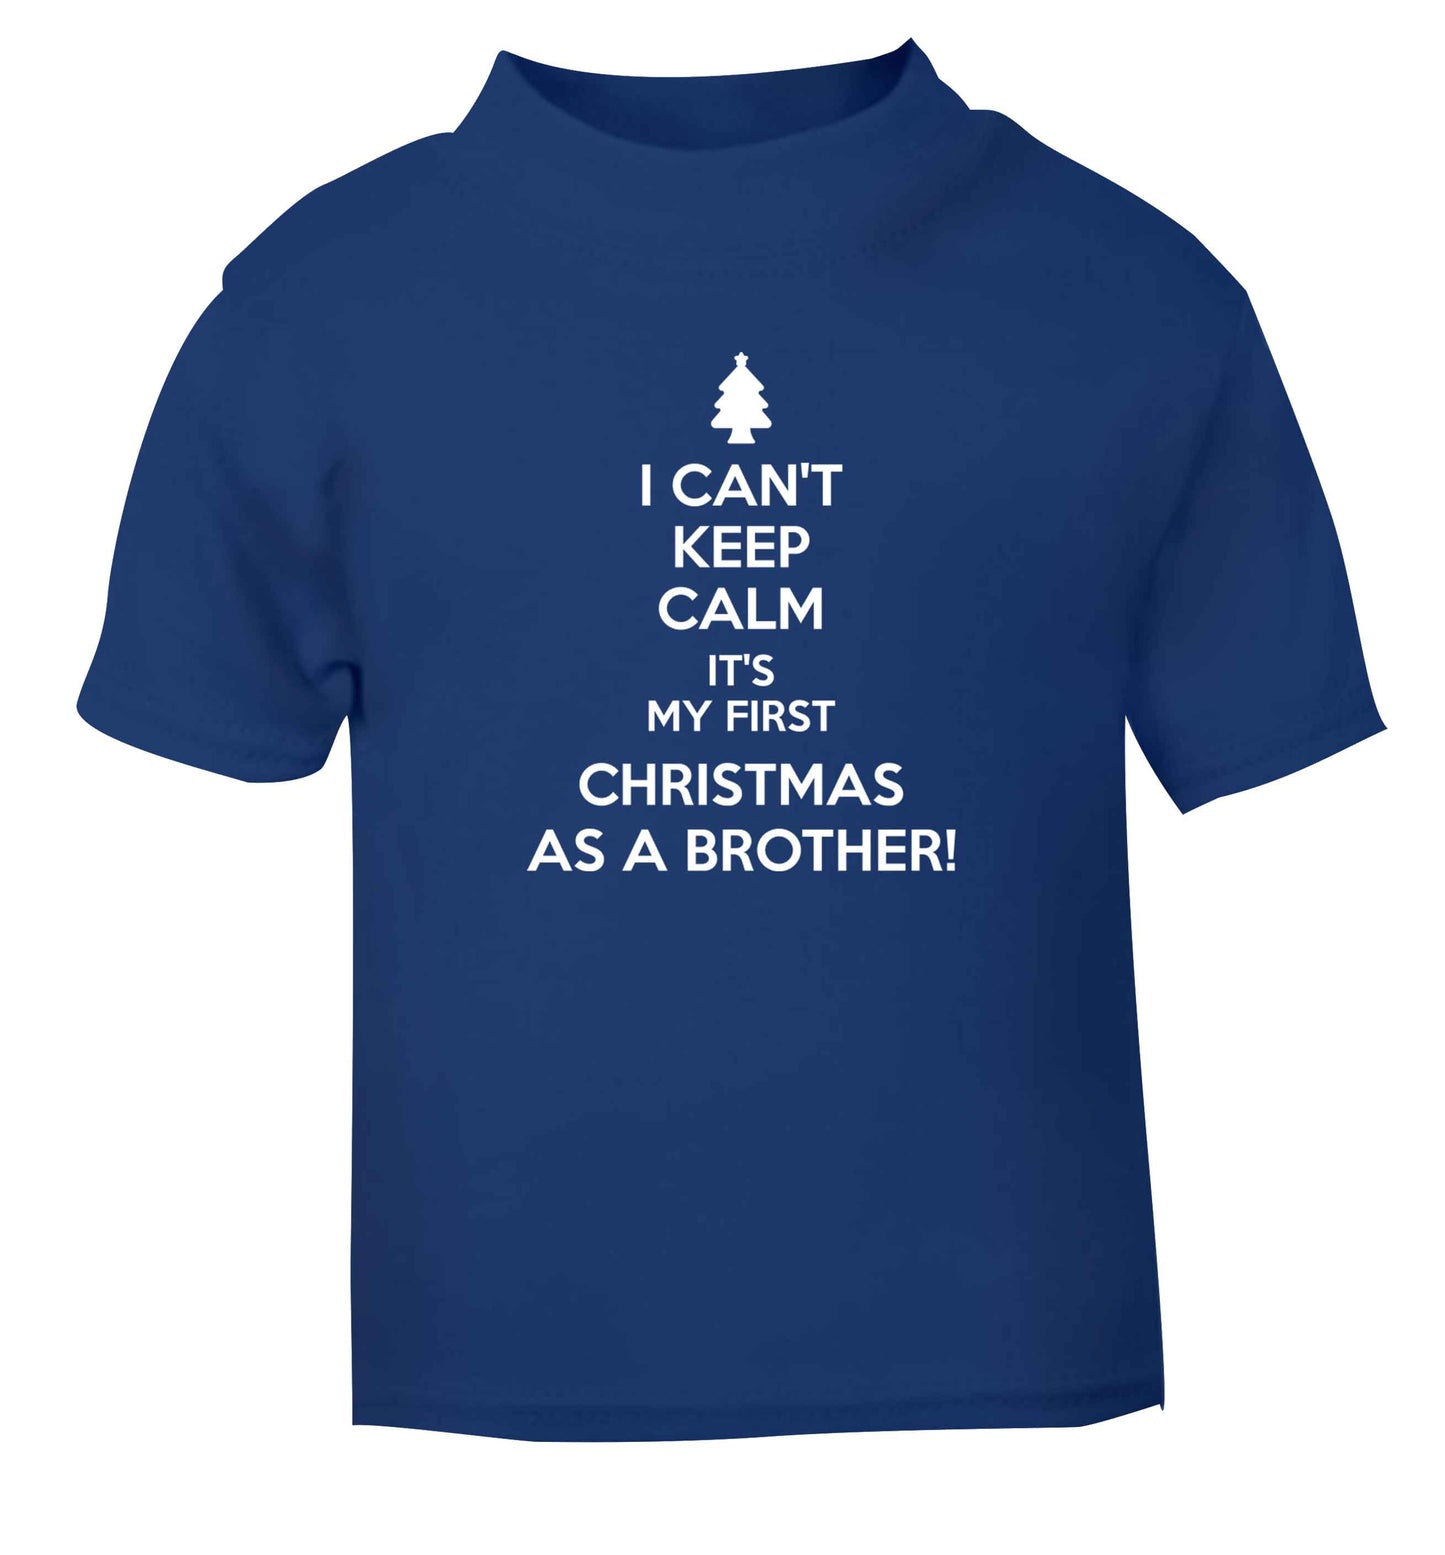 I can't keep calm it's my first Christmas as a brother! blue Baby Toddler Tshirt 2 Years